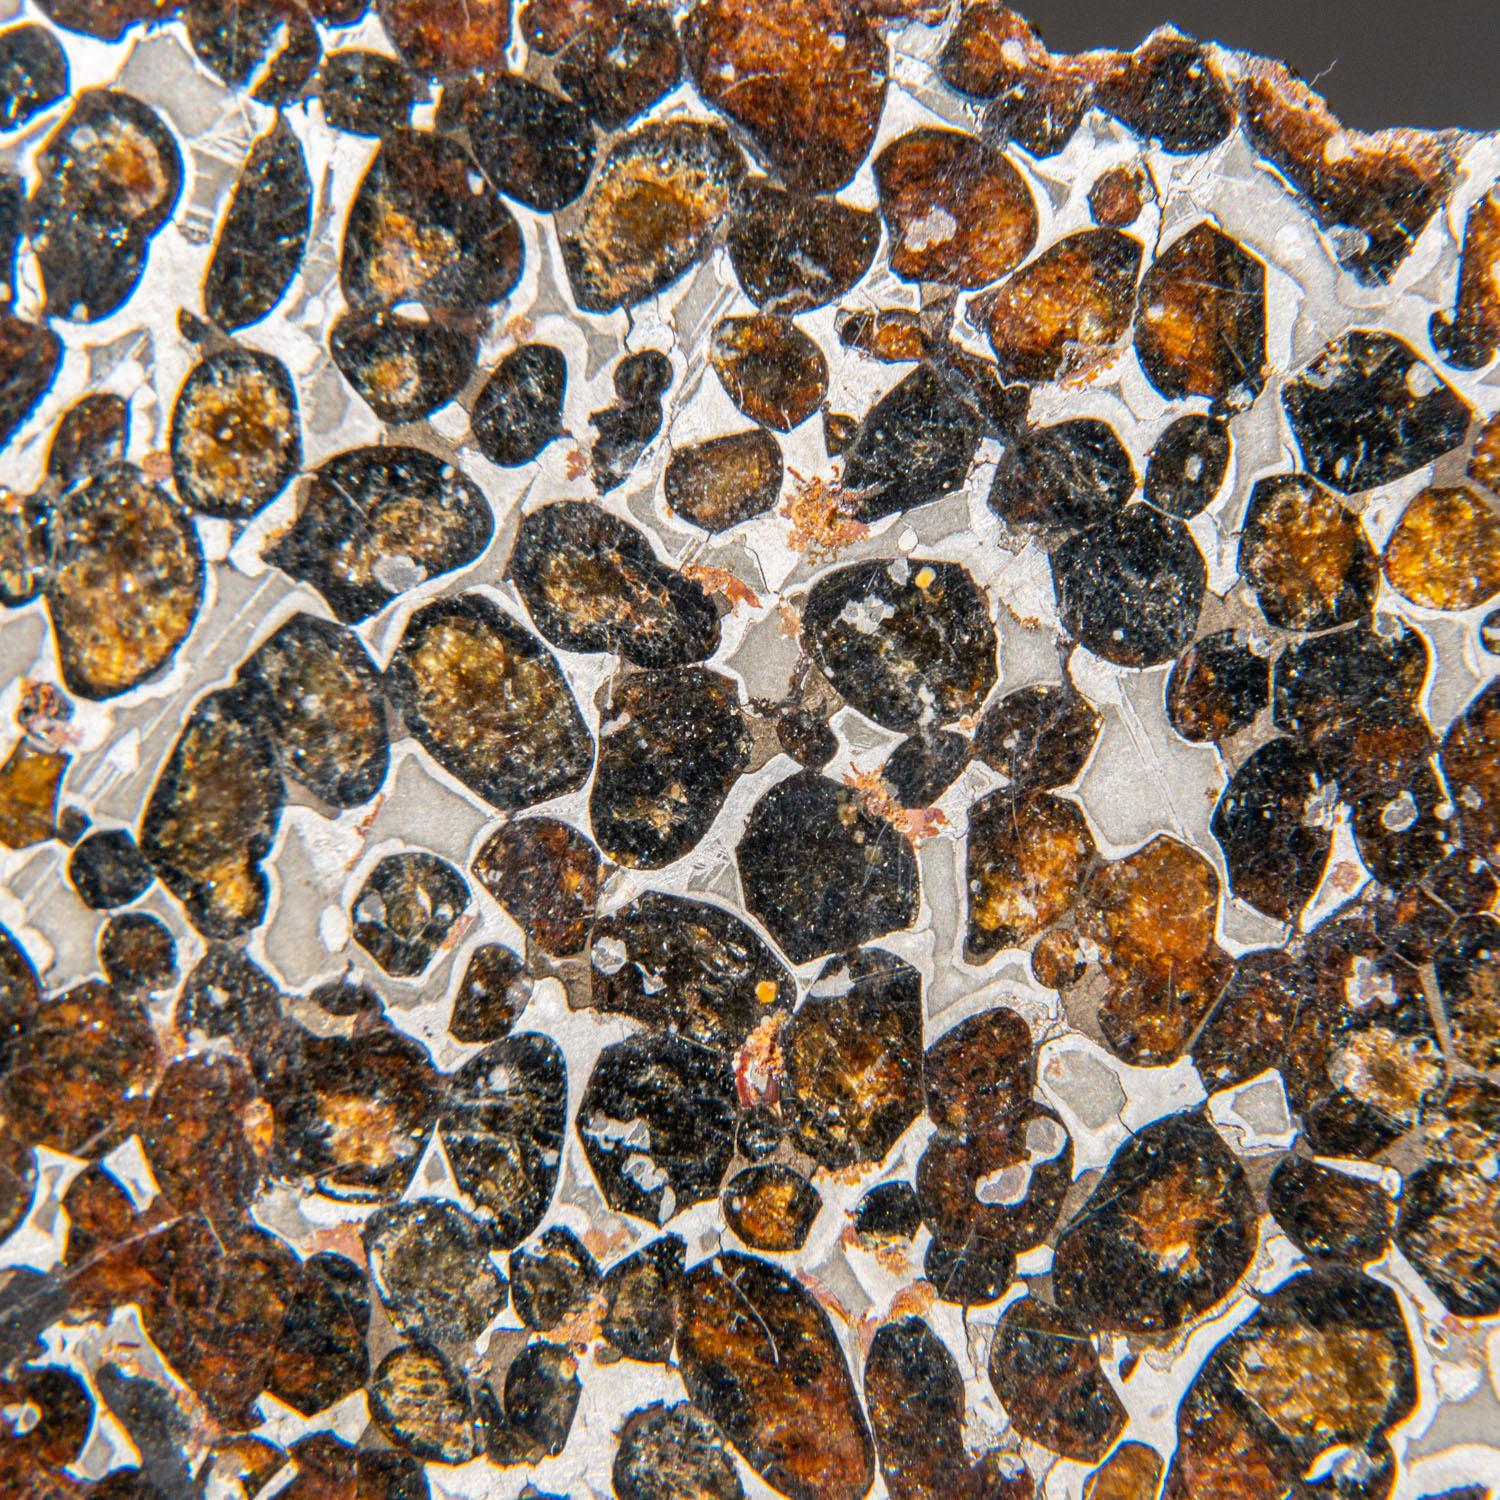 In 2016, large masses of the Sericho pallasite meteorite were acquired from villagers in Isiolo County, Kenya, marking its formal discovery. The olivine crystals range in colour from emerald green to orange and possess rounded shapes. The metal-rich